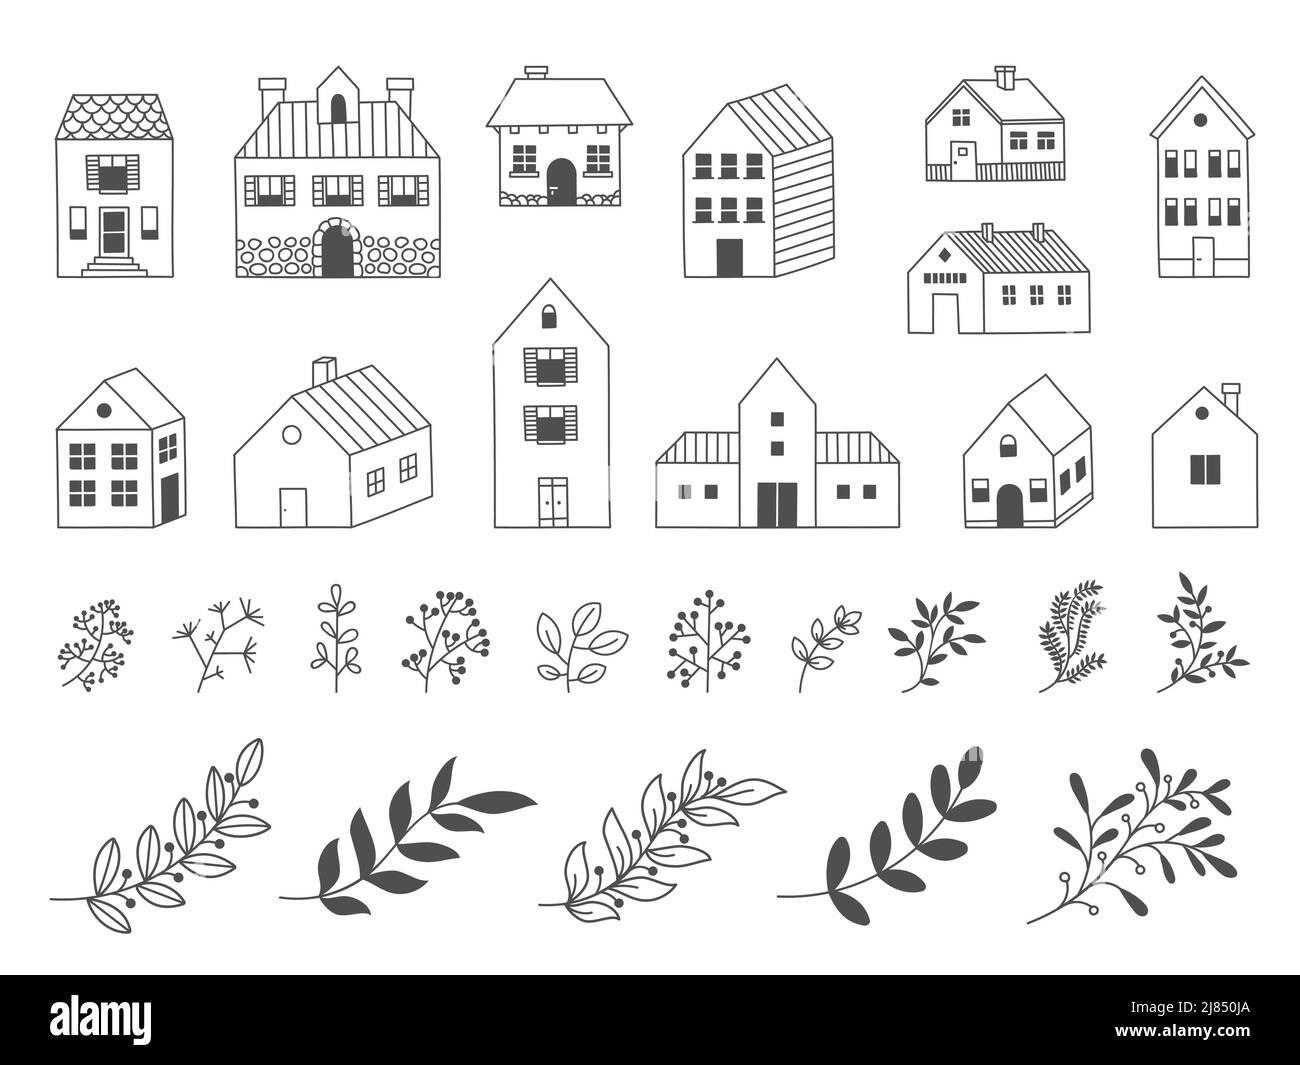 Doodle garden house. Hand drawn rural wooden building with floristic decorative elements, flowers leaves grass. Vector country cabin isolated set Stock Vector